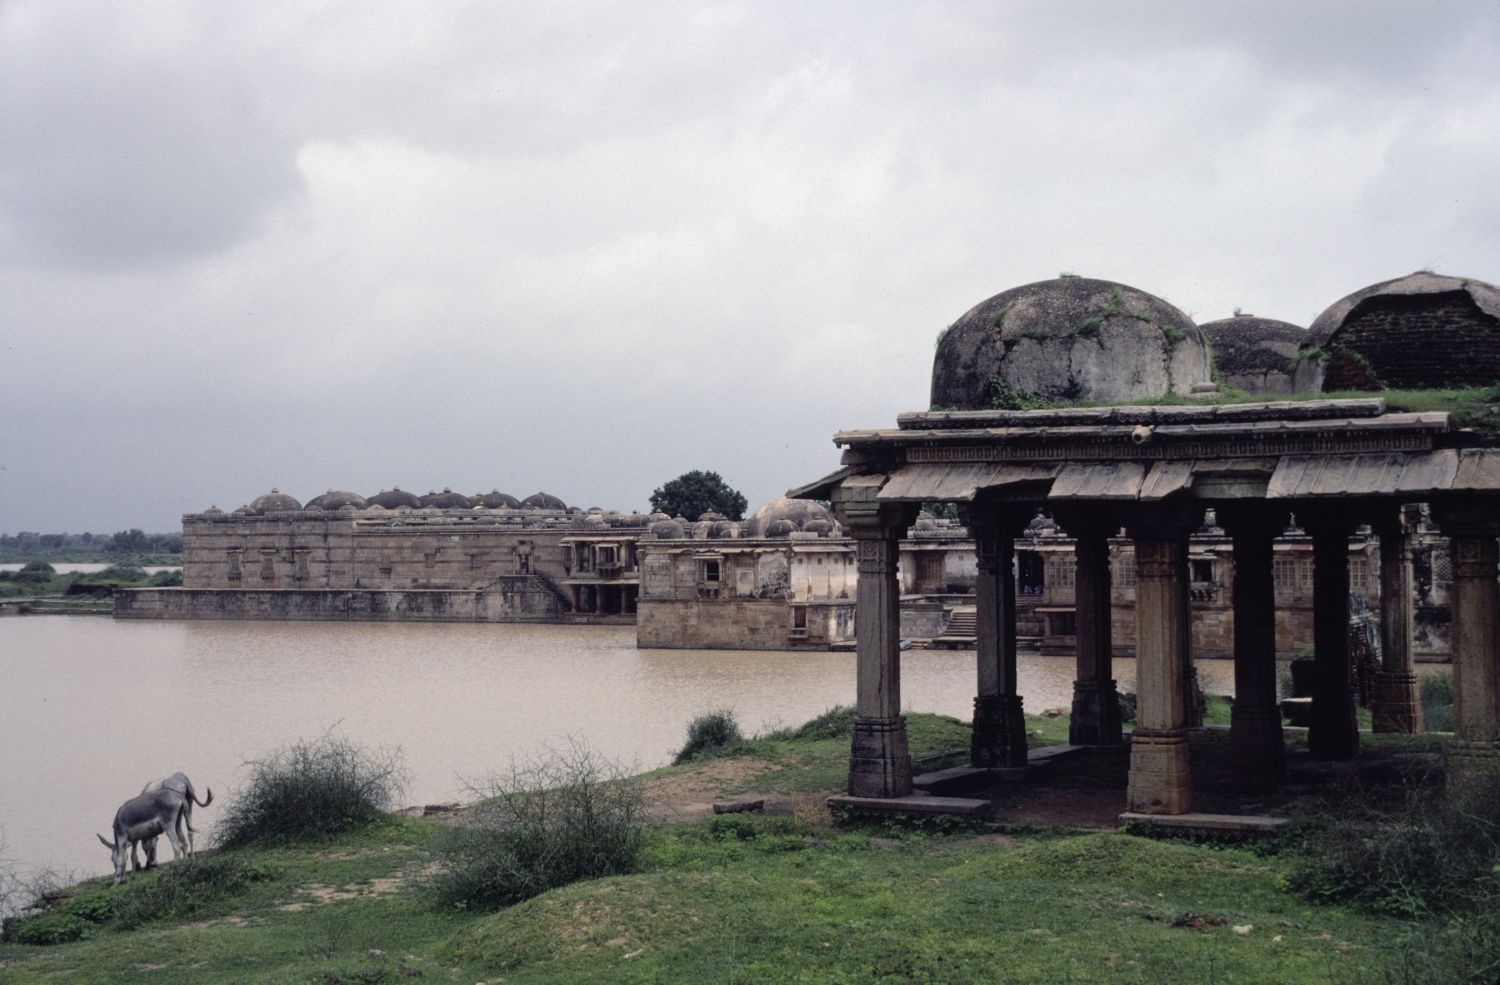 View from east bank of tank across the water facing northwest, with southern facade of mosque and tombs visible in background.